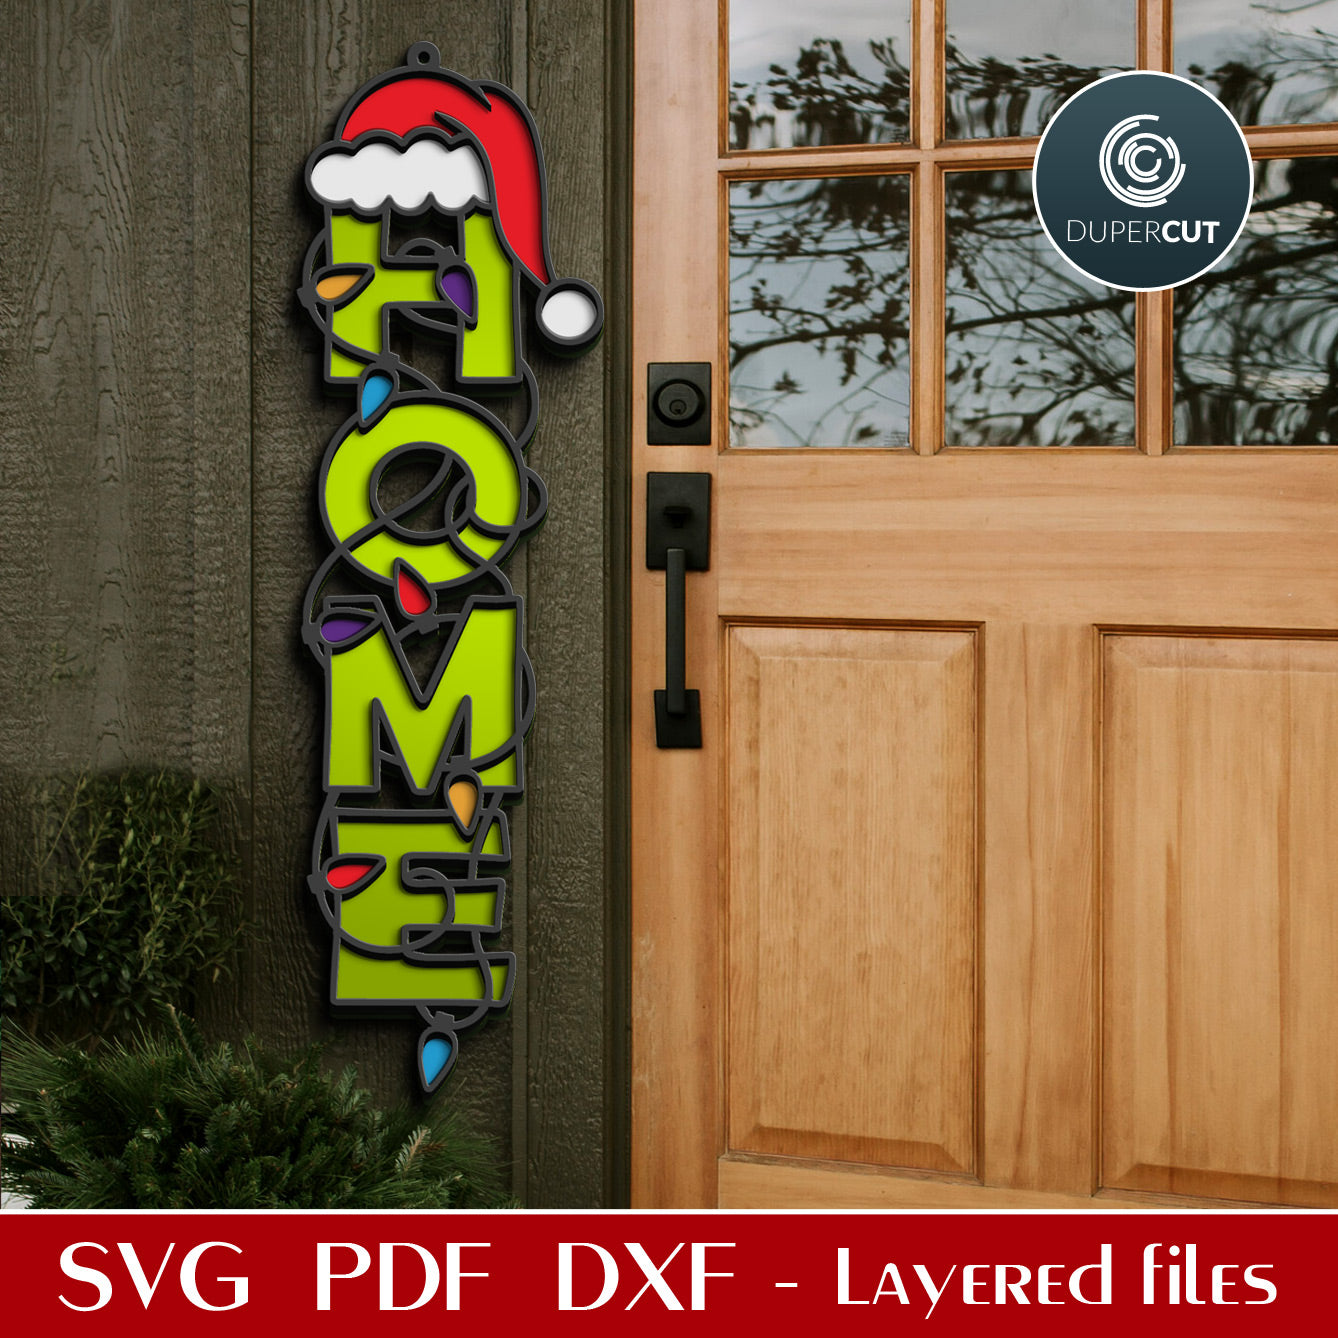 HOME holiday sign door hanger - SVG DXF layered vector files for laser cutting with Glowforge, Cricut, Silhouette, CNC plasma by DuperCut